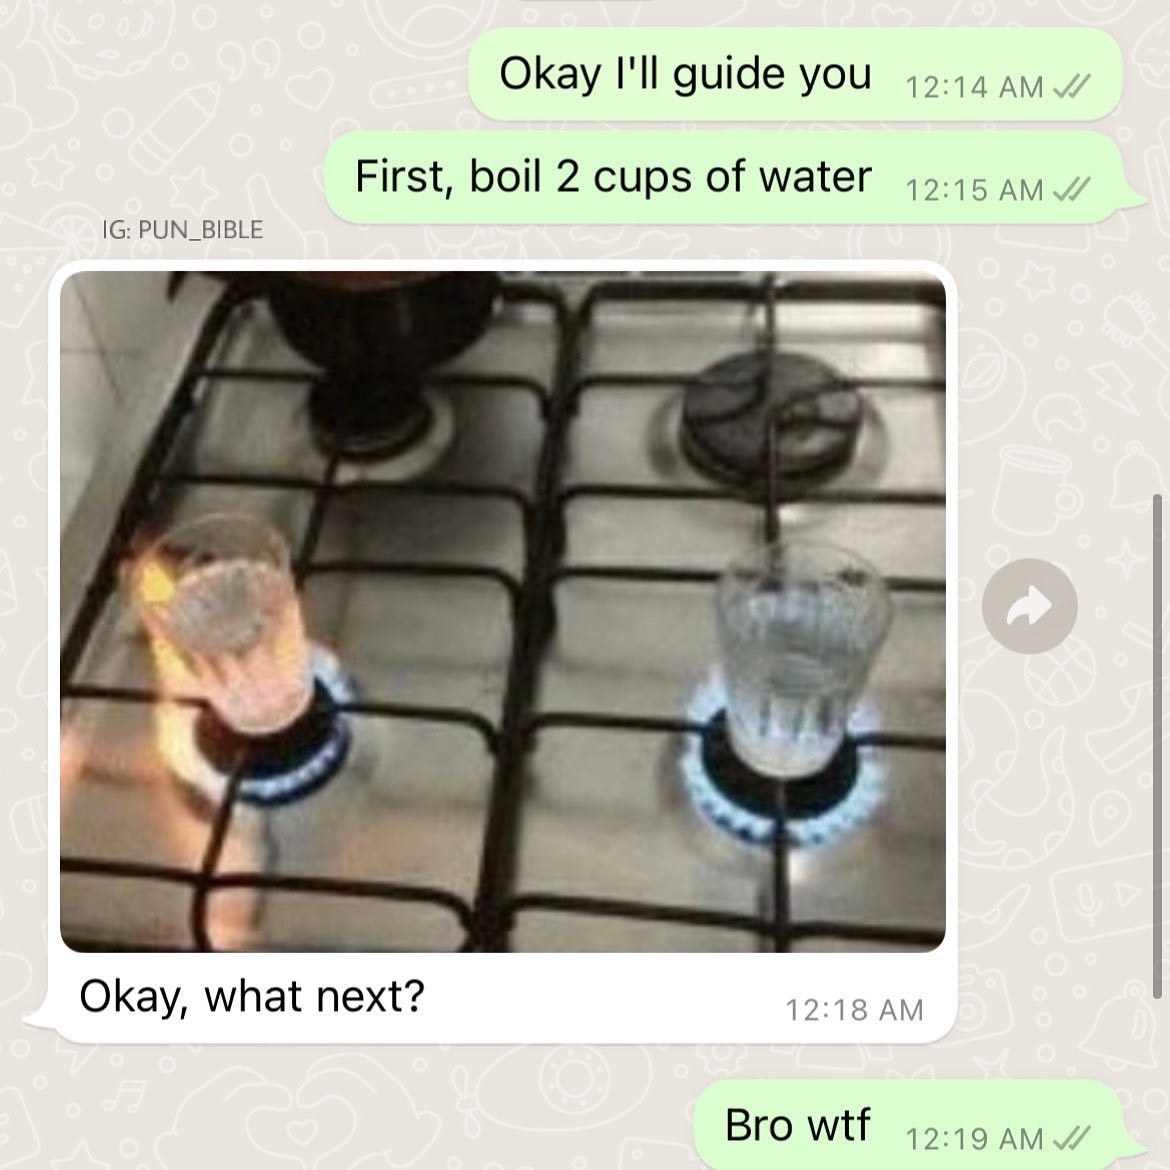 person being told to boil water and they boil cups